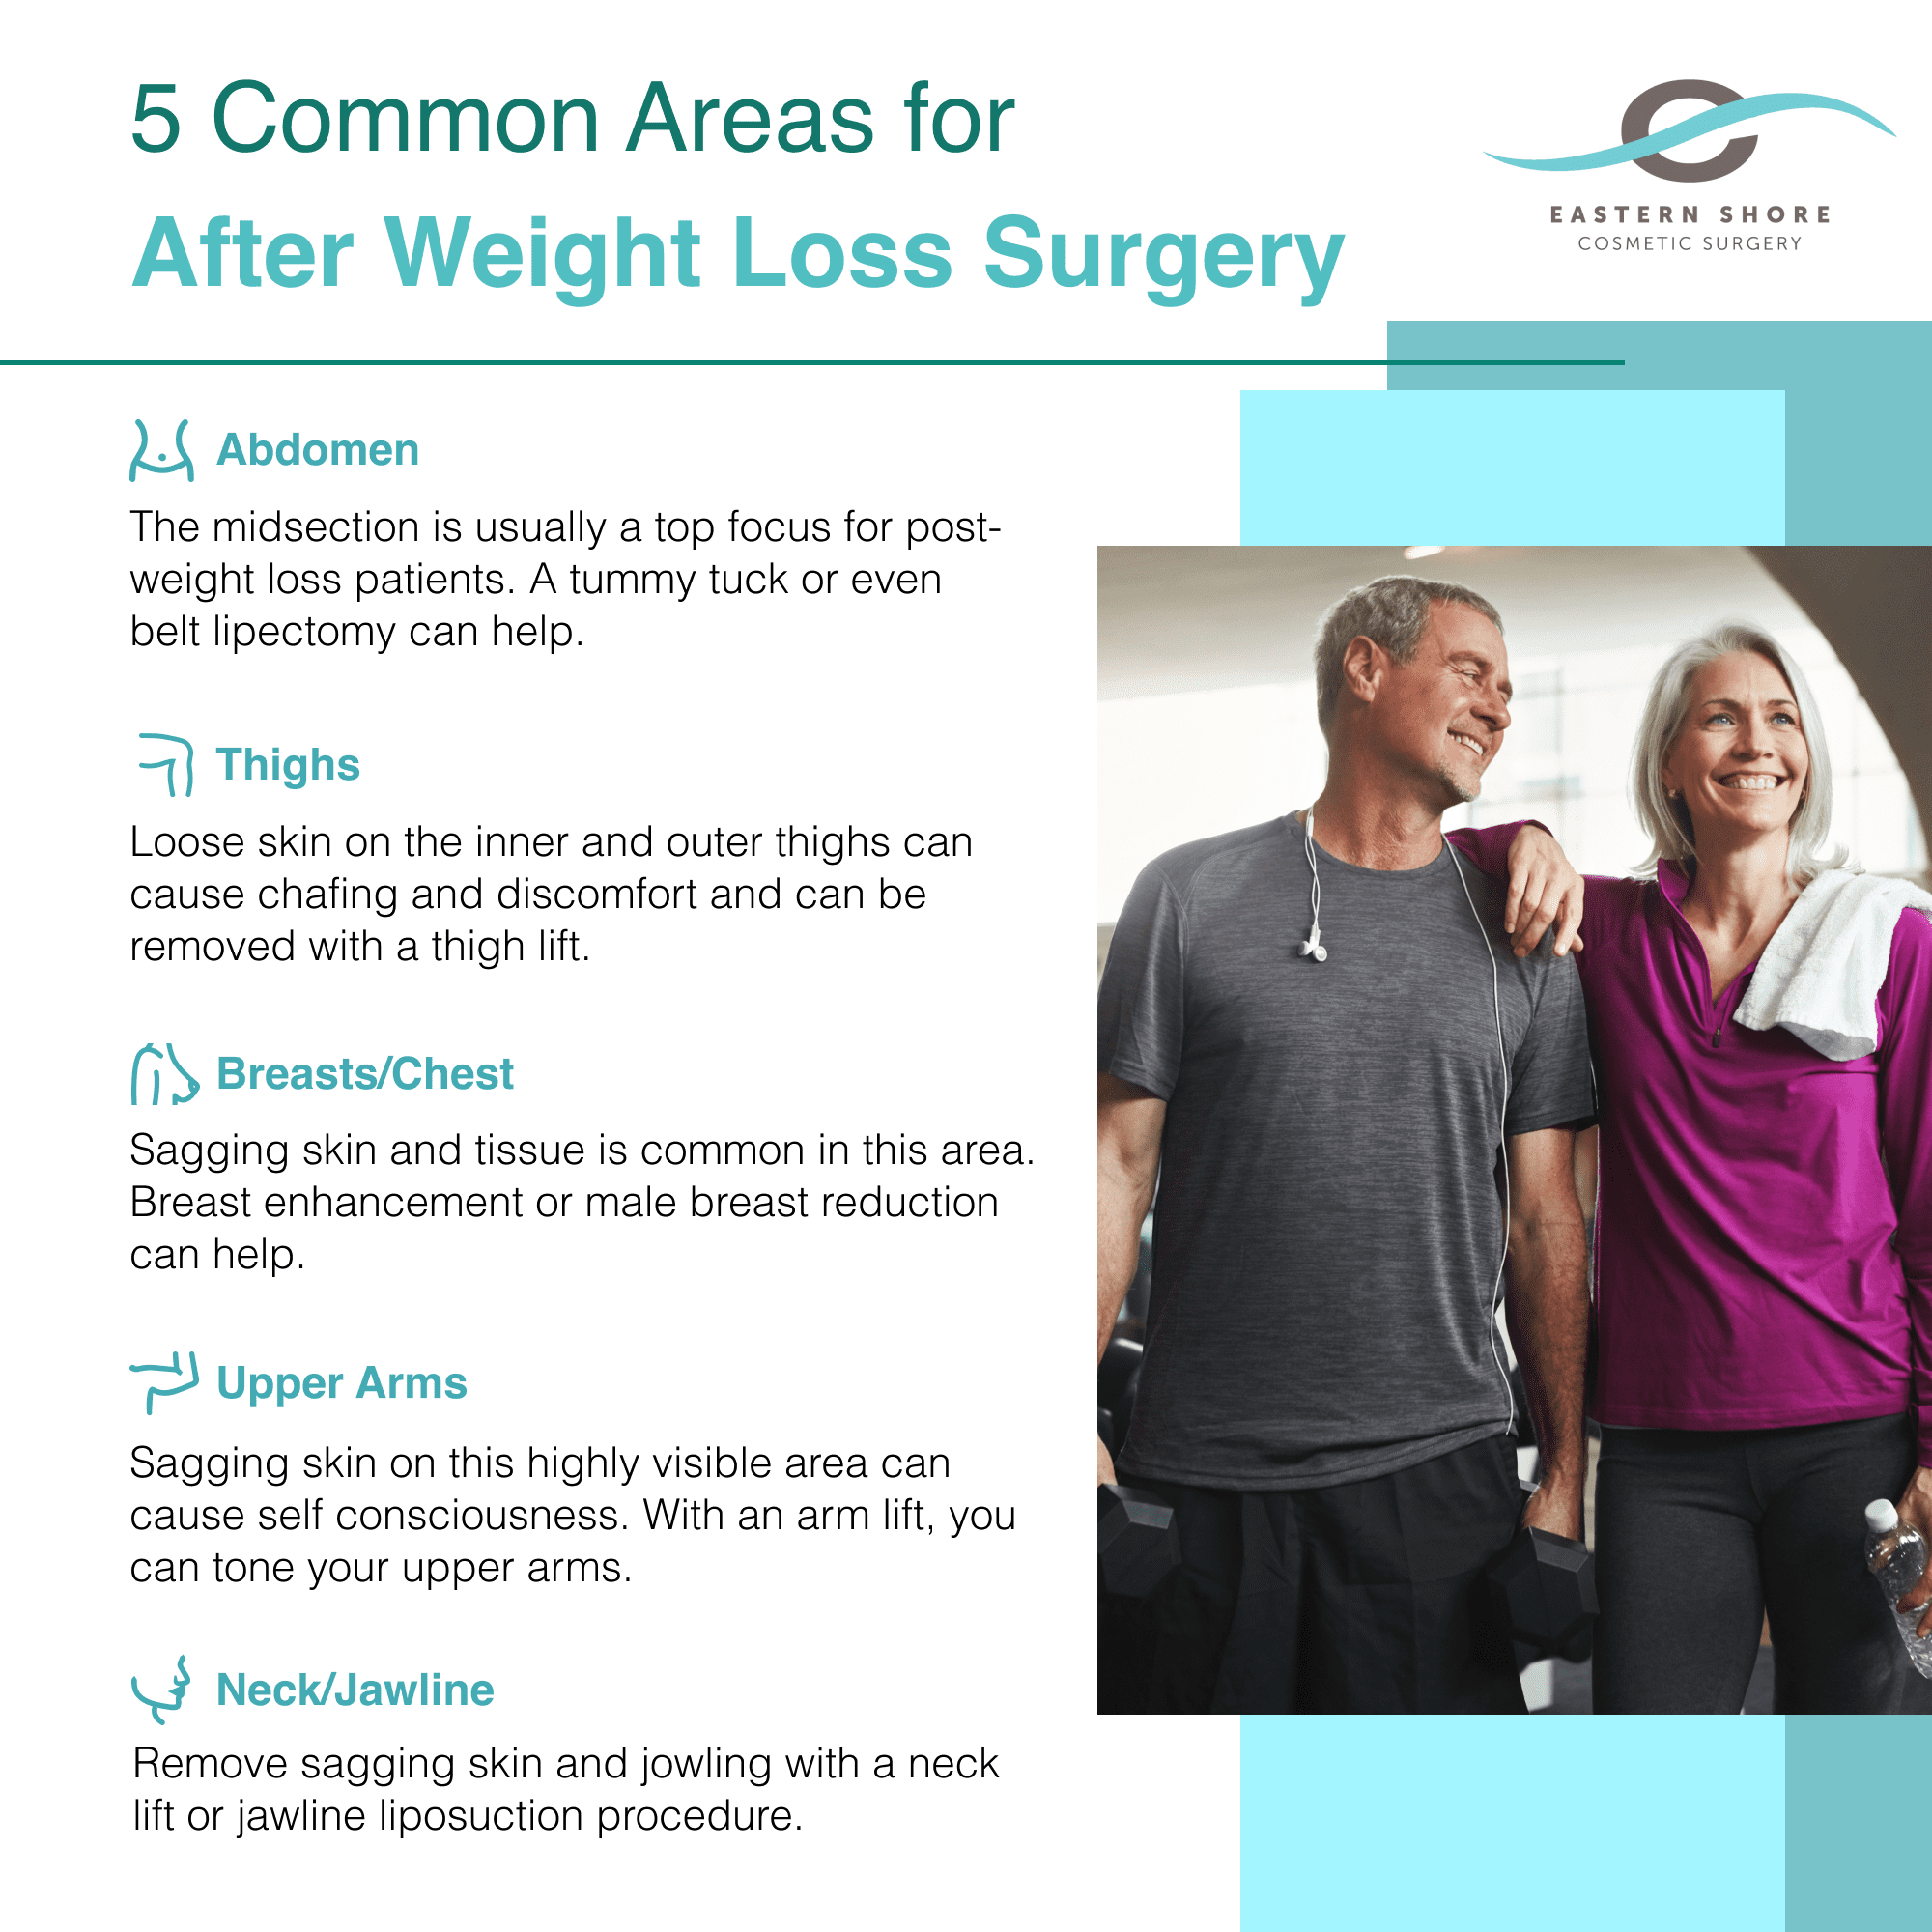 5 Common Areas for After Weight Loss Surgery